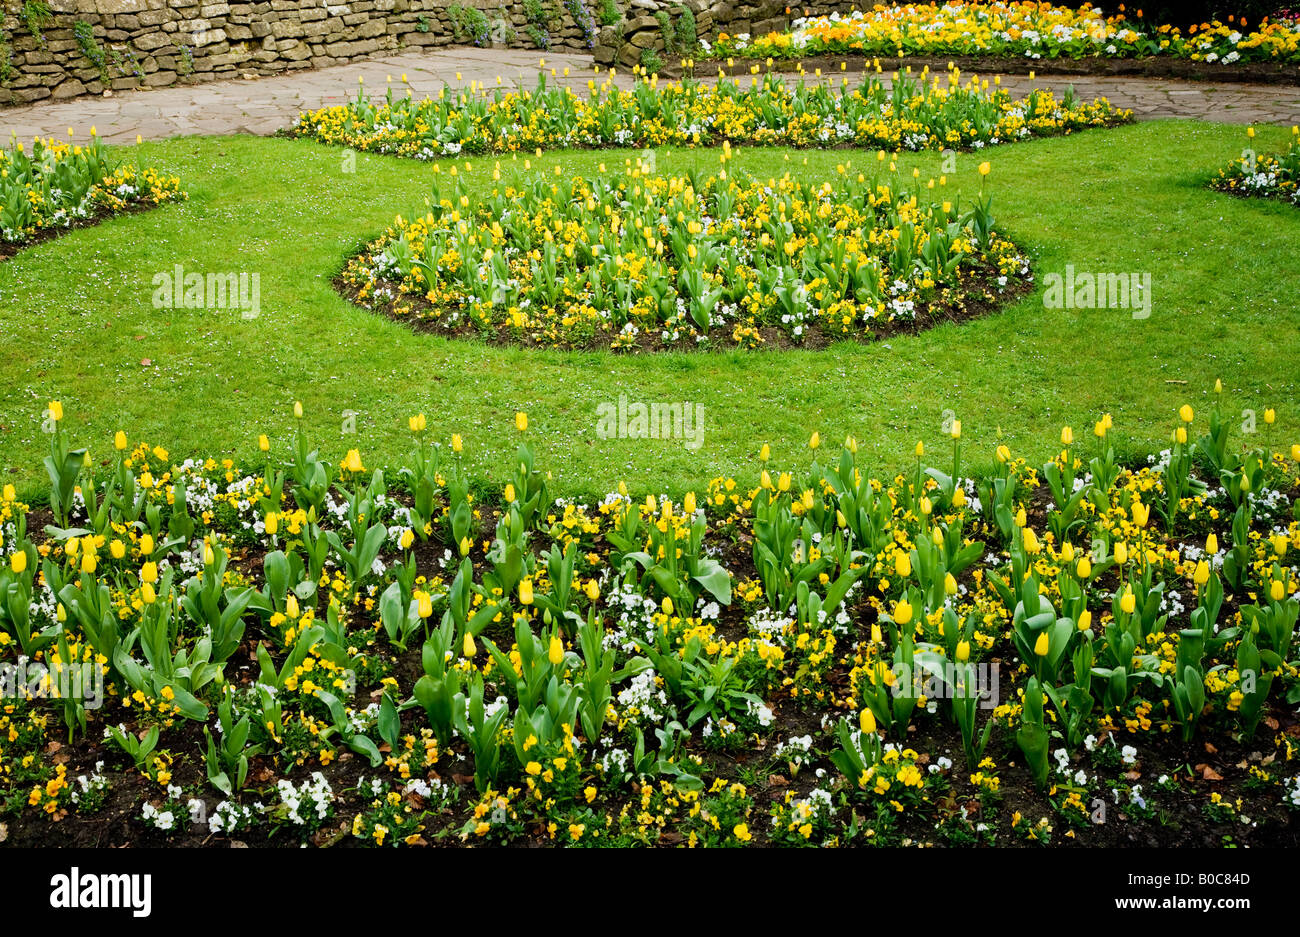 Formal spring flower beds of yellow tulips and pansies in the Town Gardens, Swindon, Wiltshire, England, UK Stock Photo